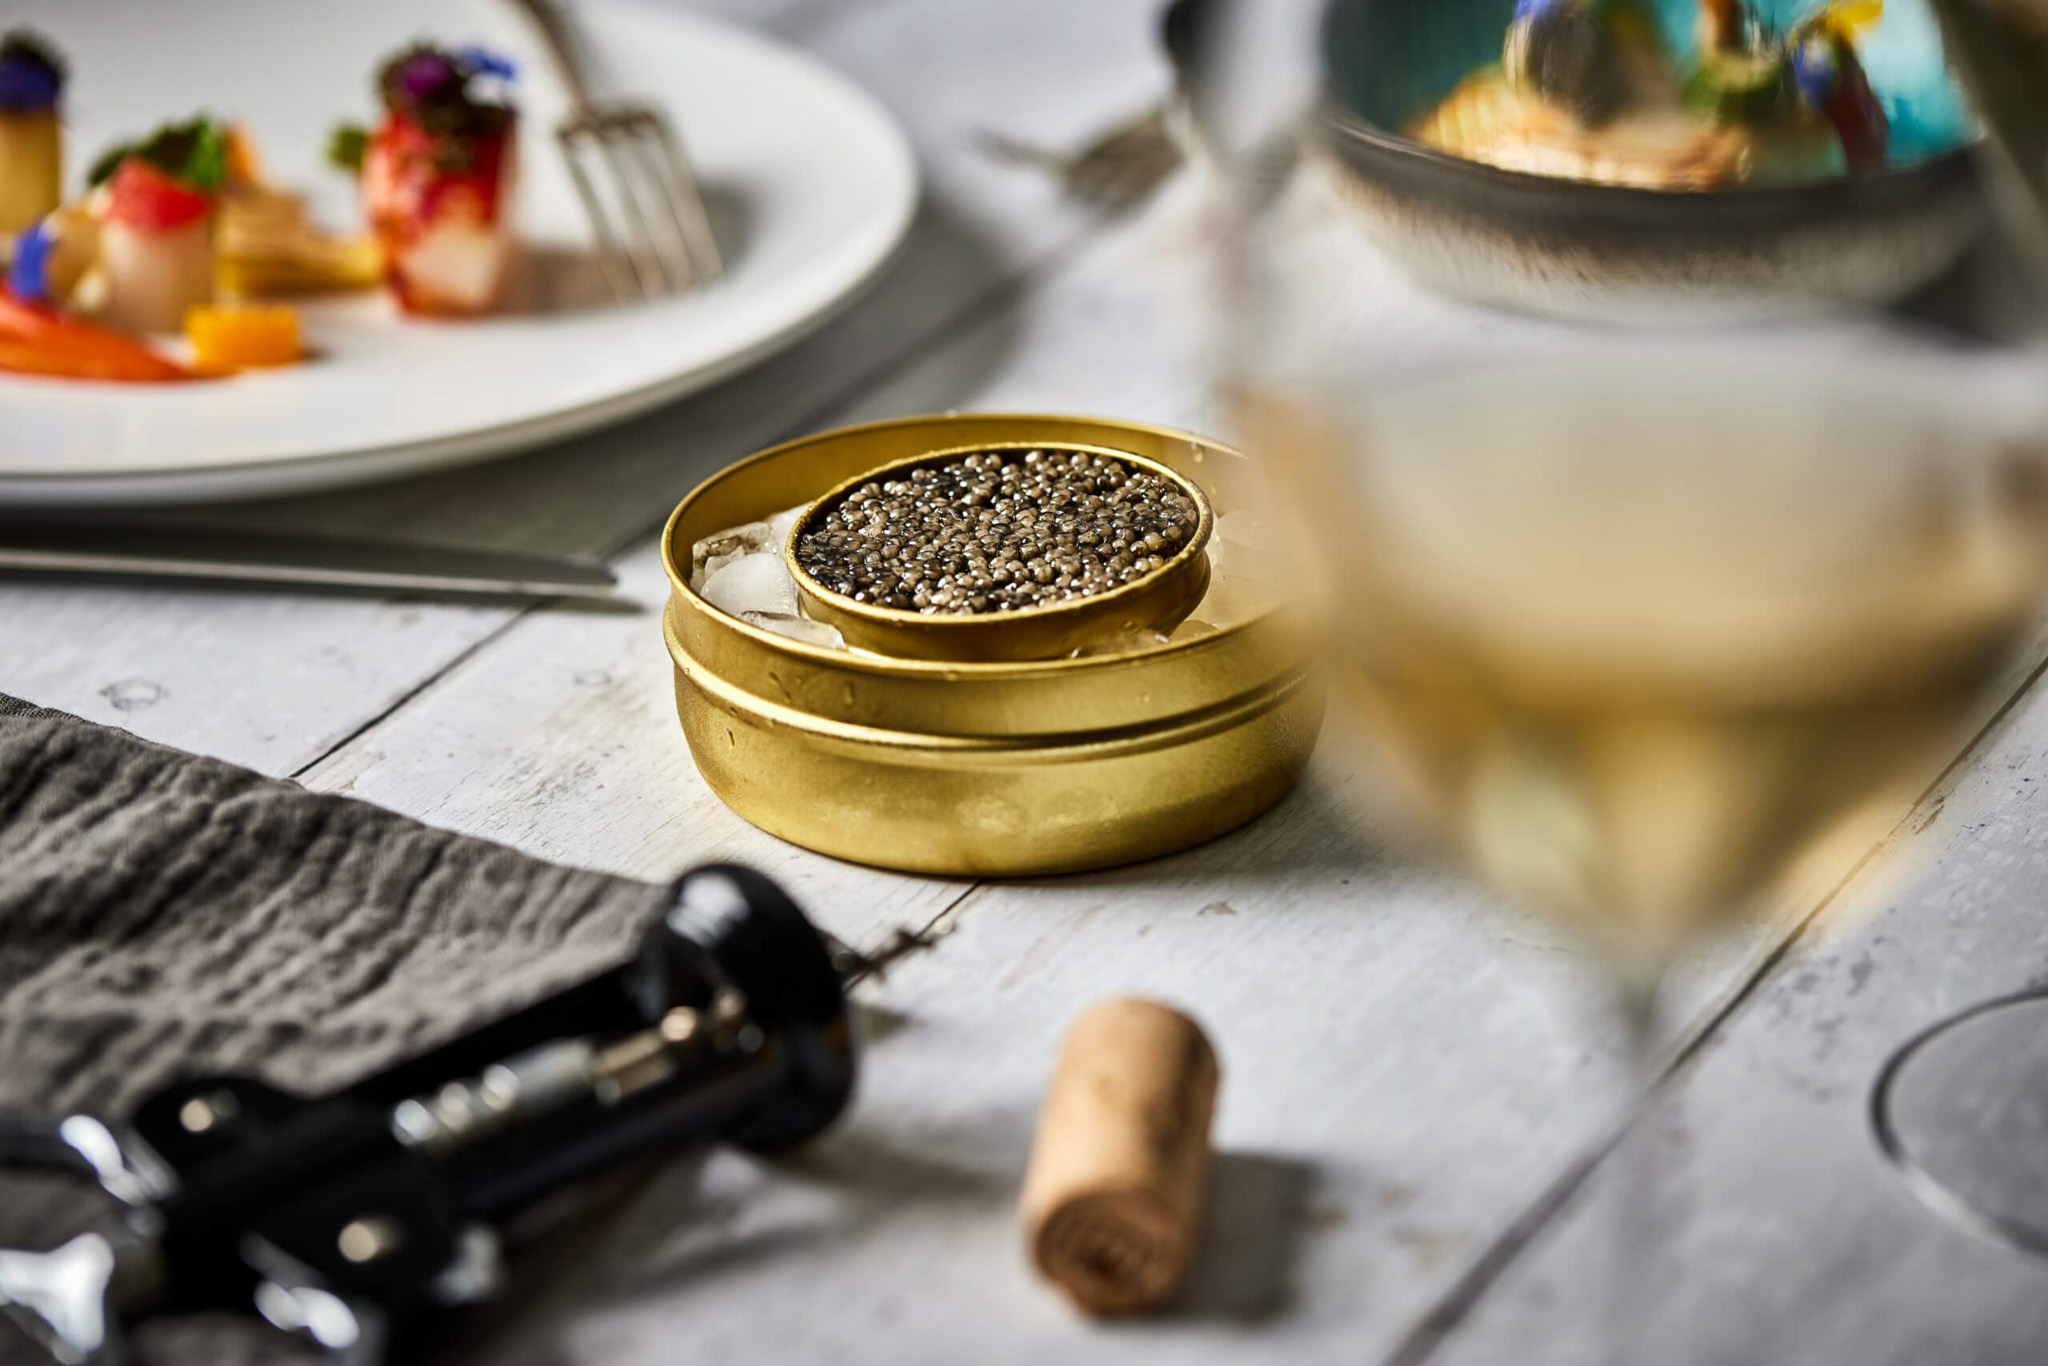 London Caviar with surrounded by lobster and wine